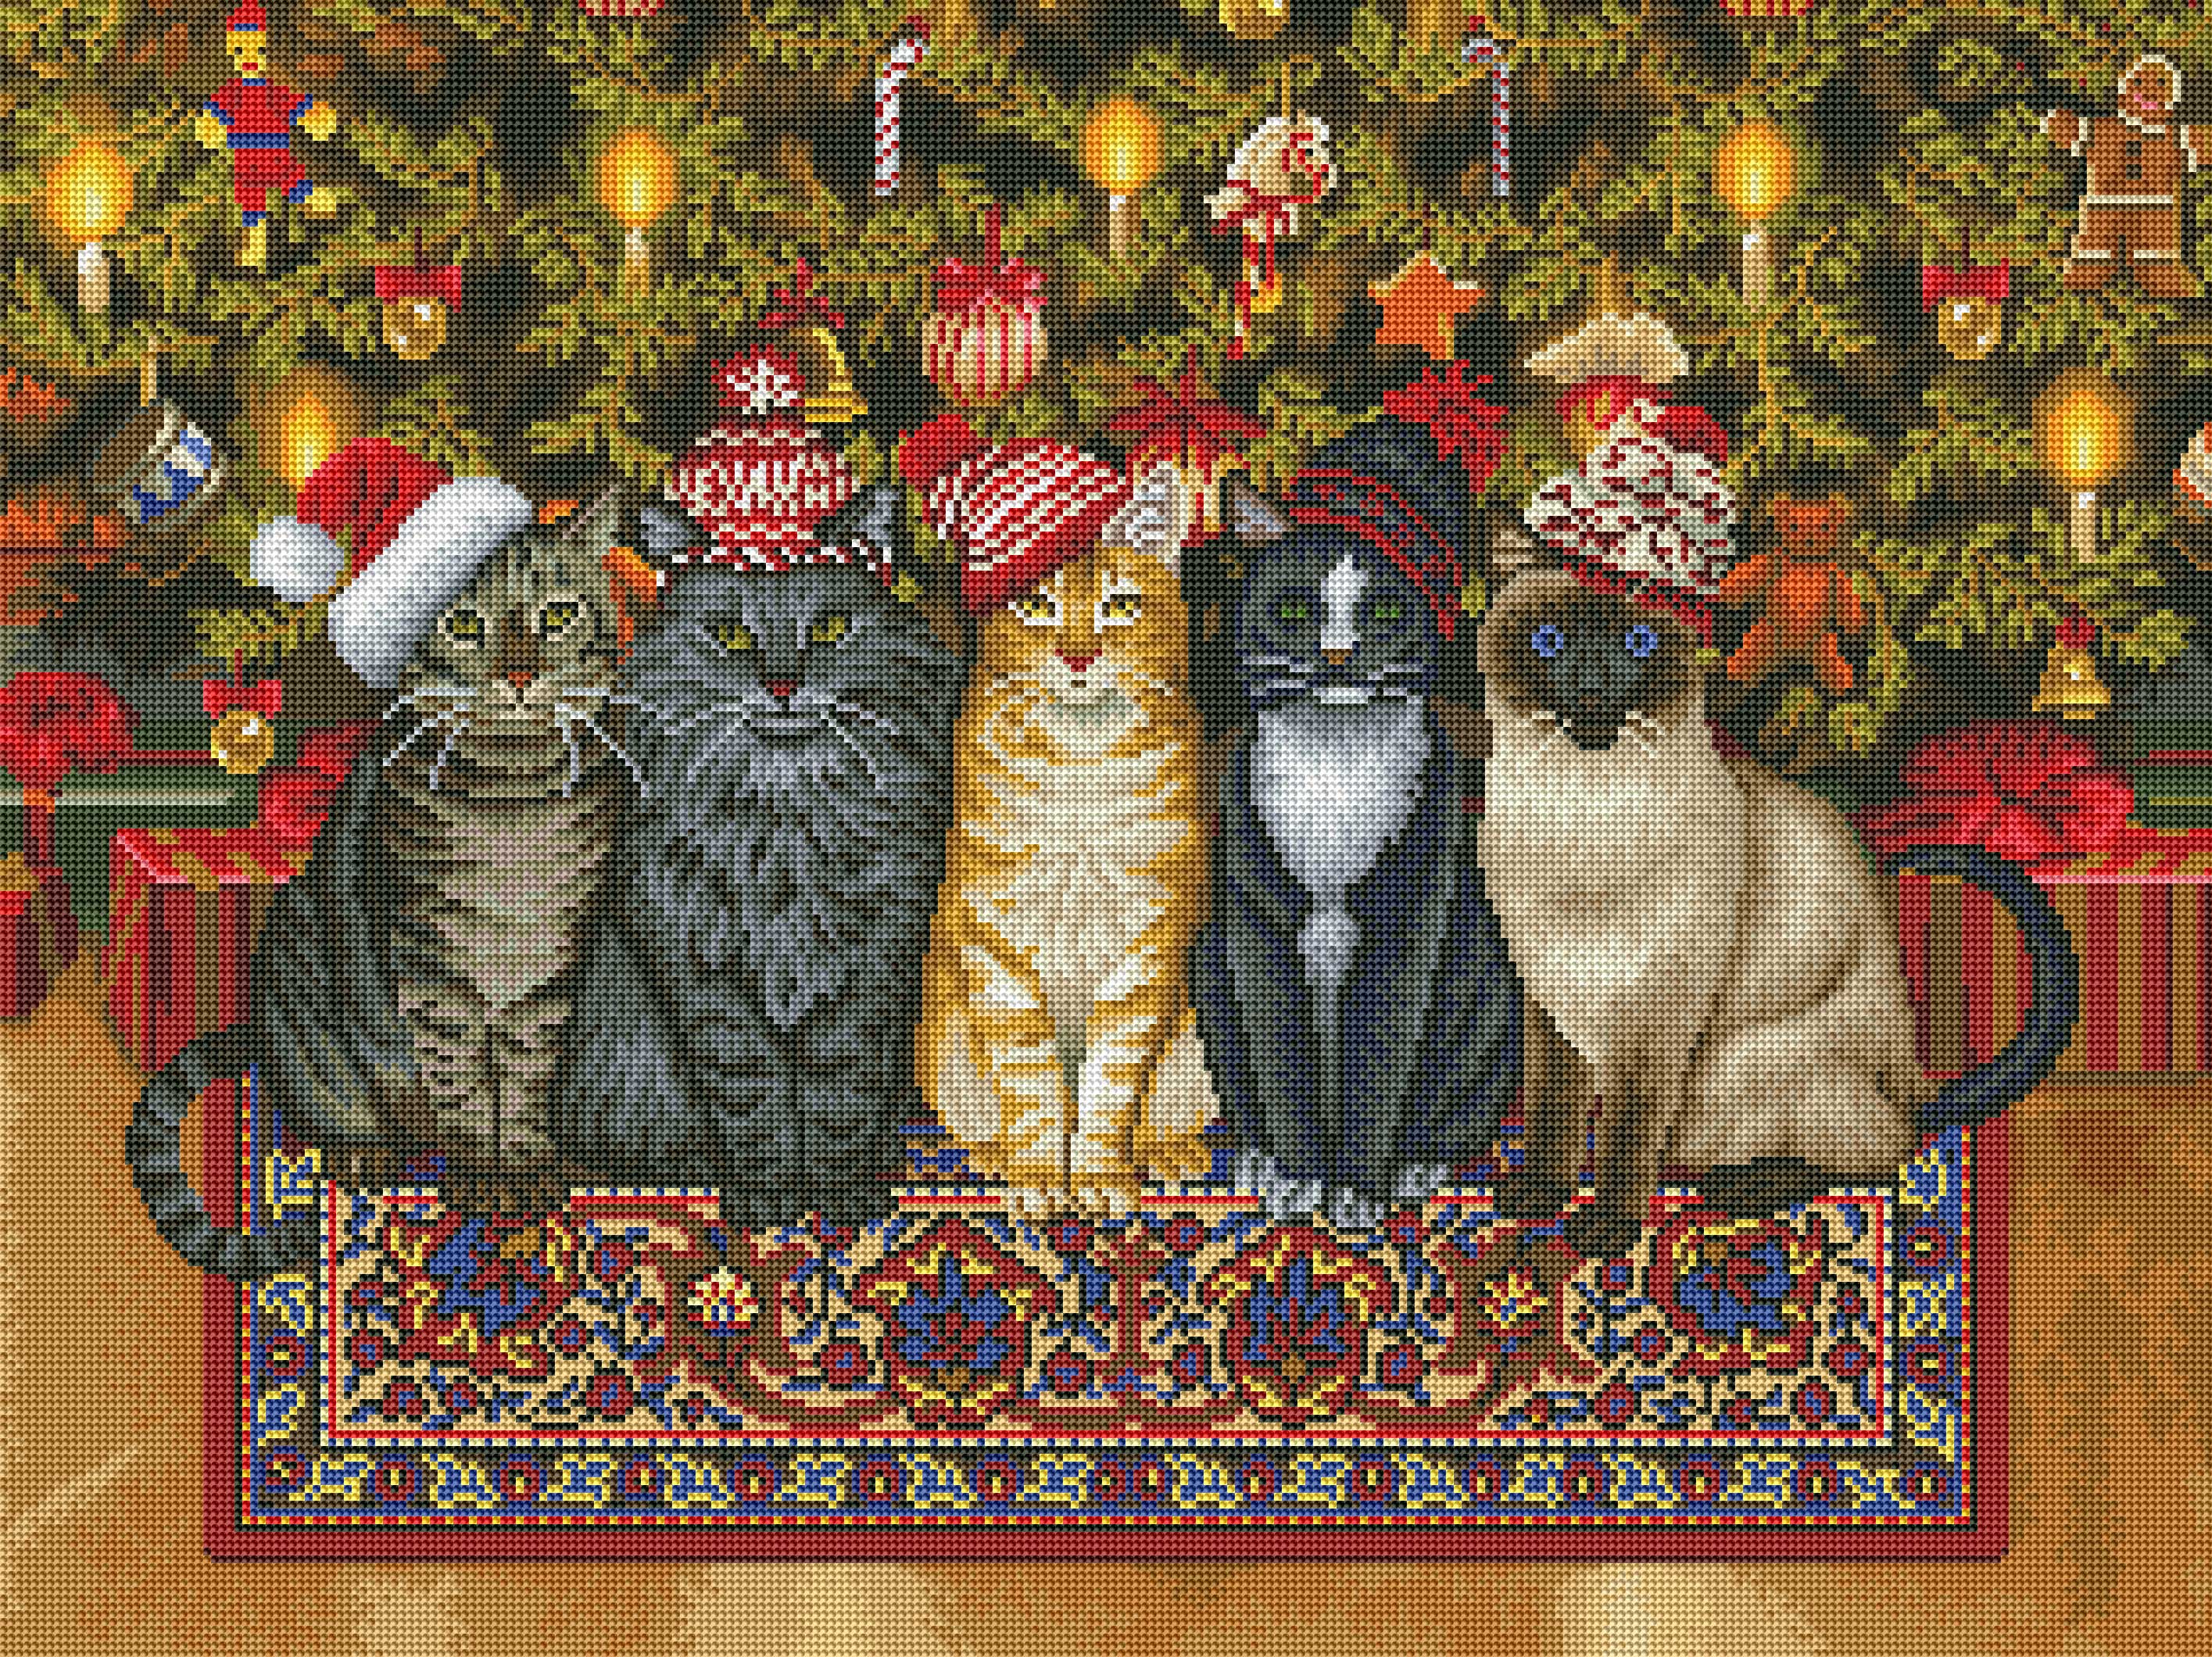 Cats In Christmas Hats